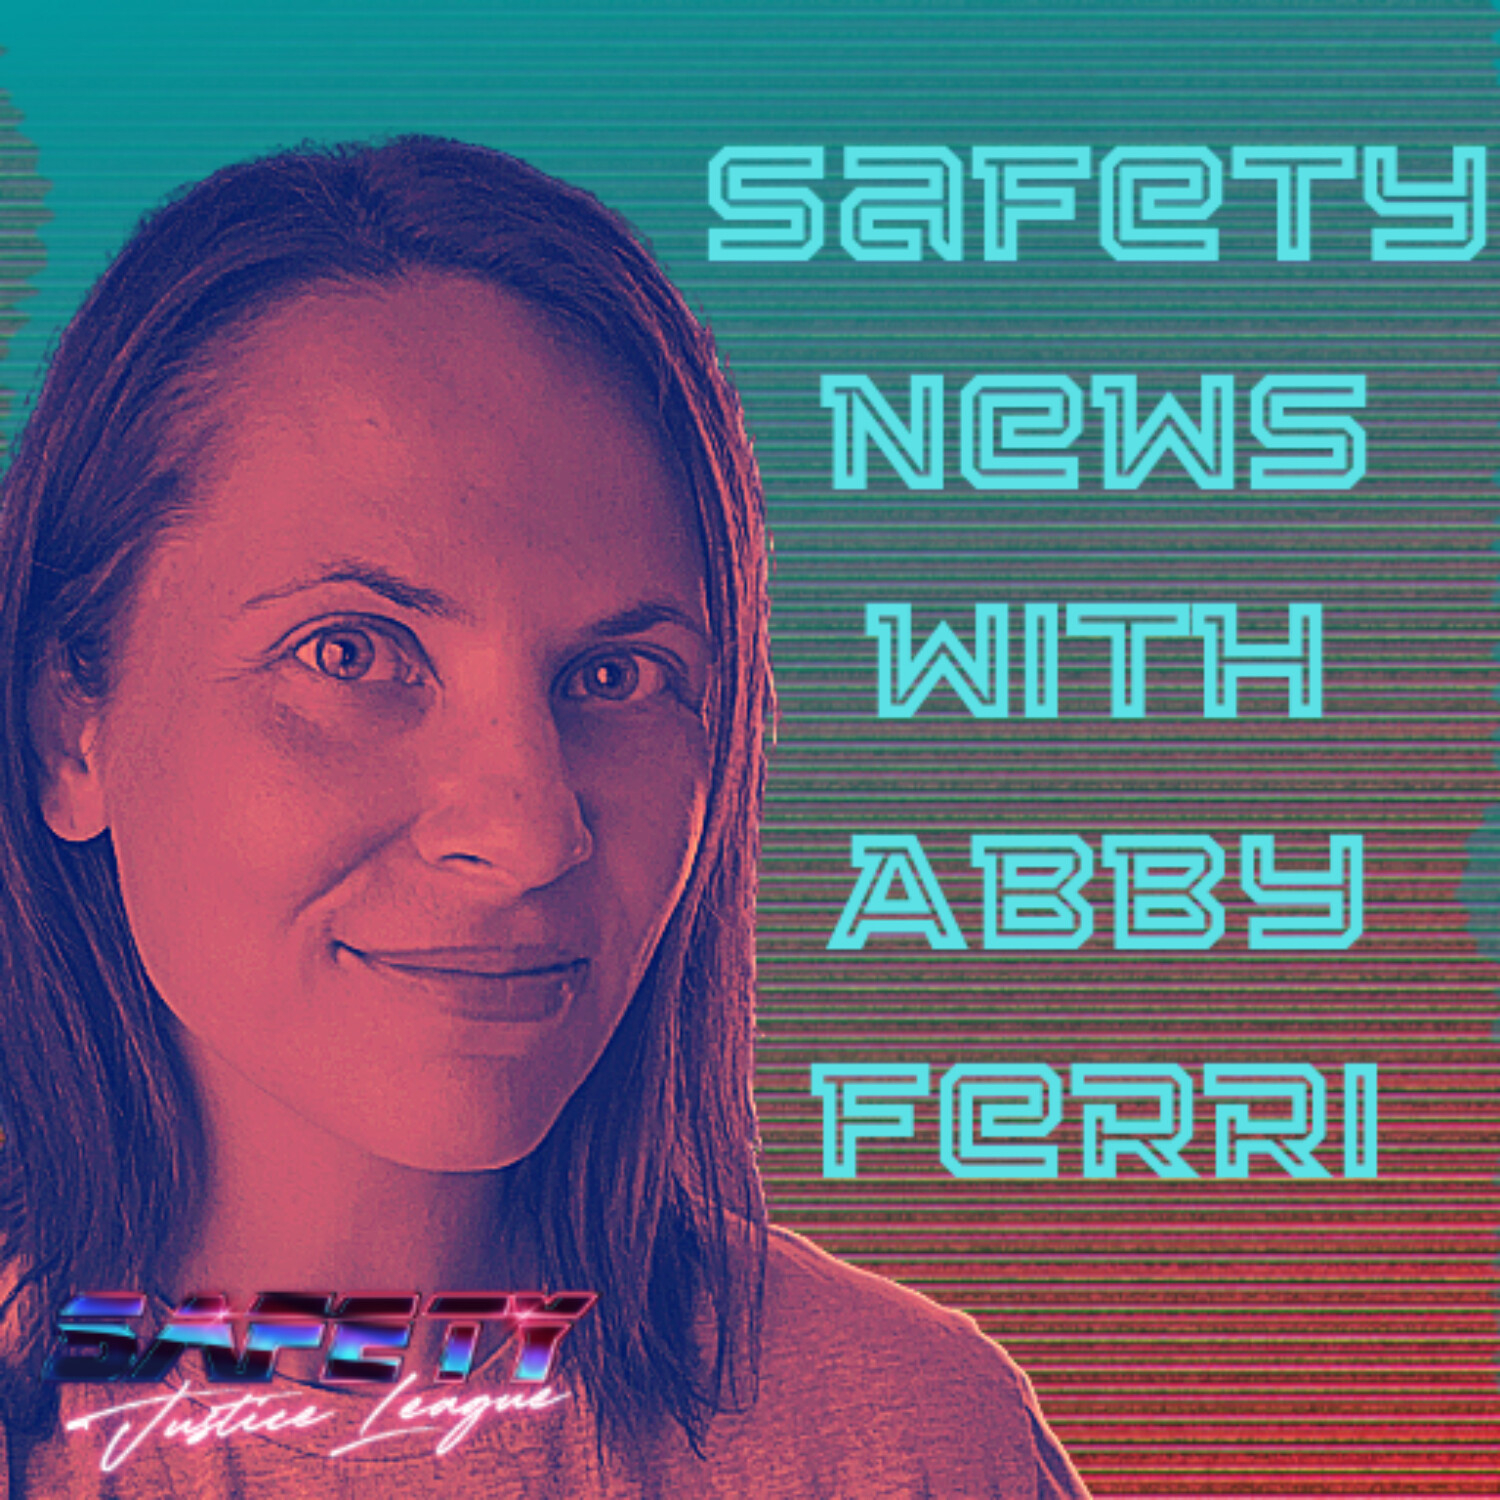 SJL Sh0rts: Safety News with Abby Ferri: Sept 21st Edition